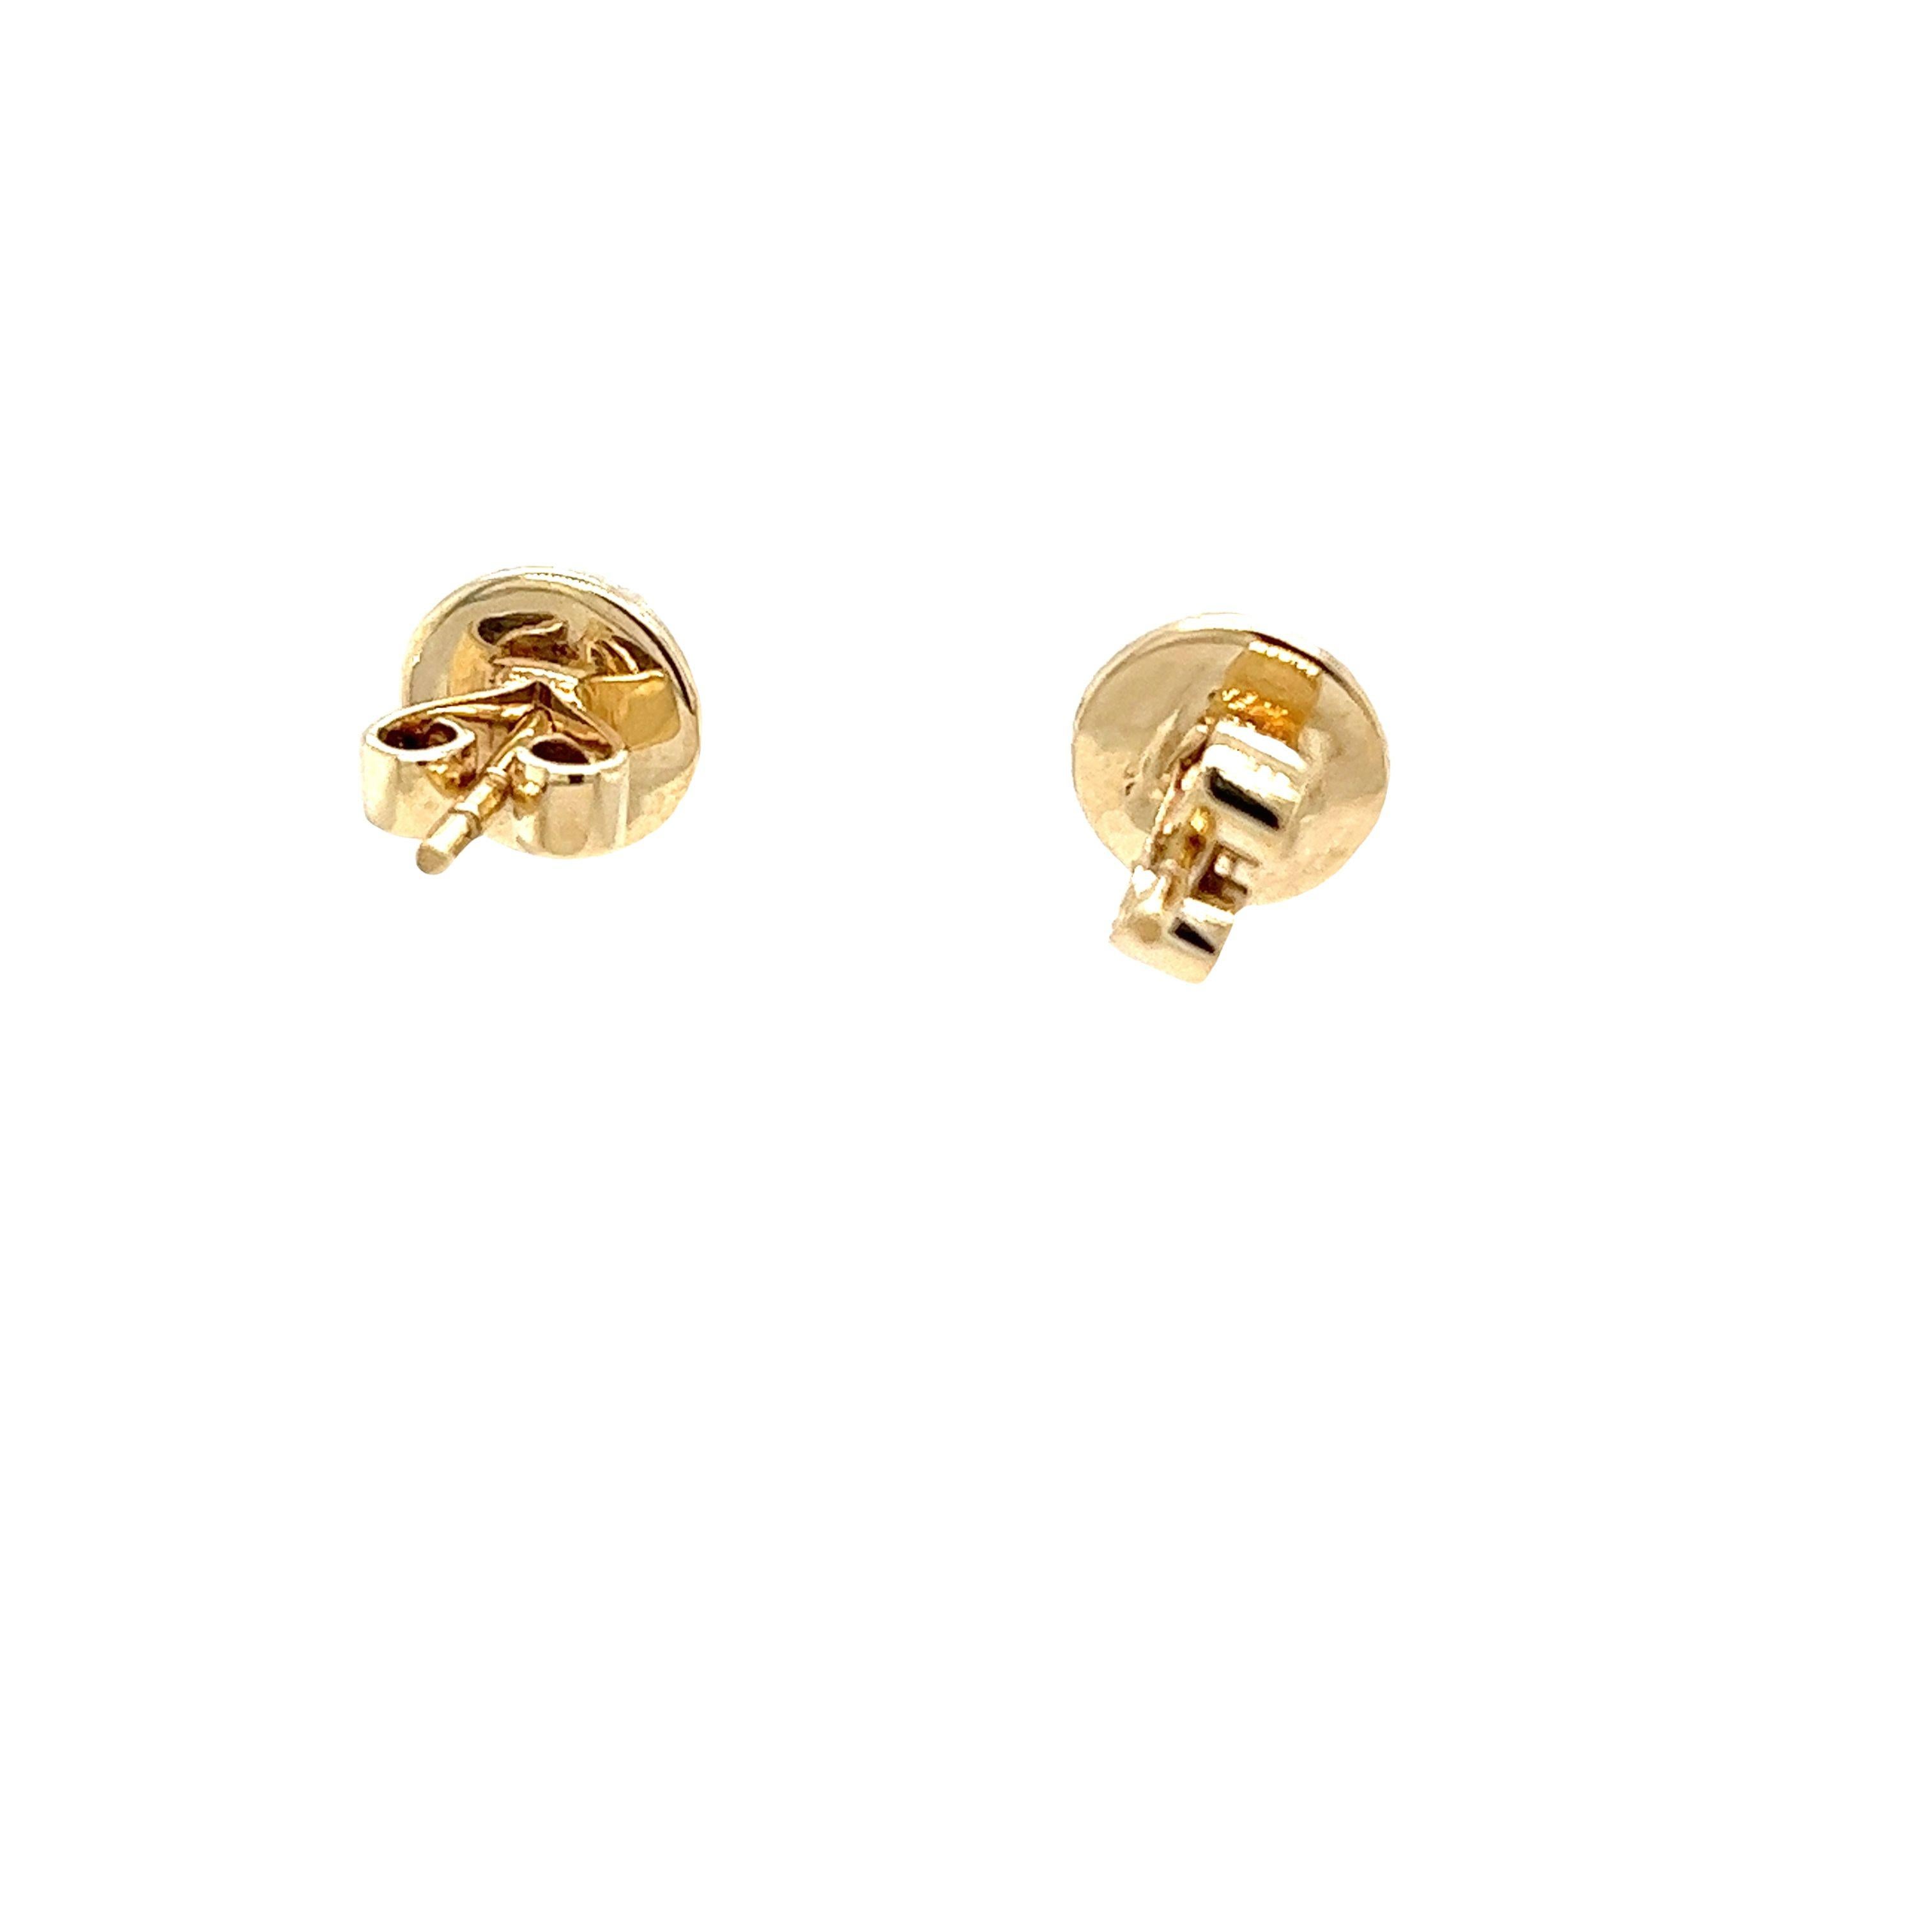 Women's 9ct Yellow & White Gold Diamond Stud Earrings, 0.65ct Total Diamond Weight For Sale